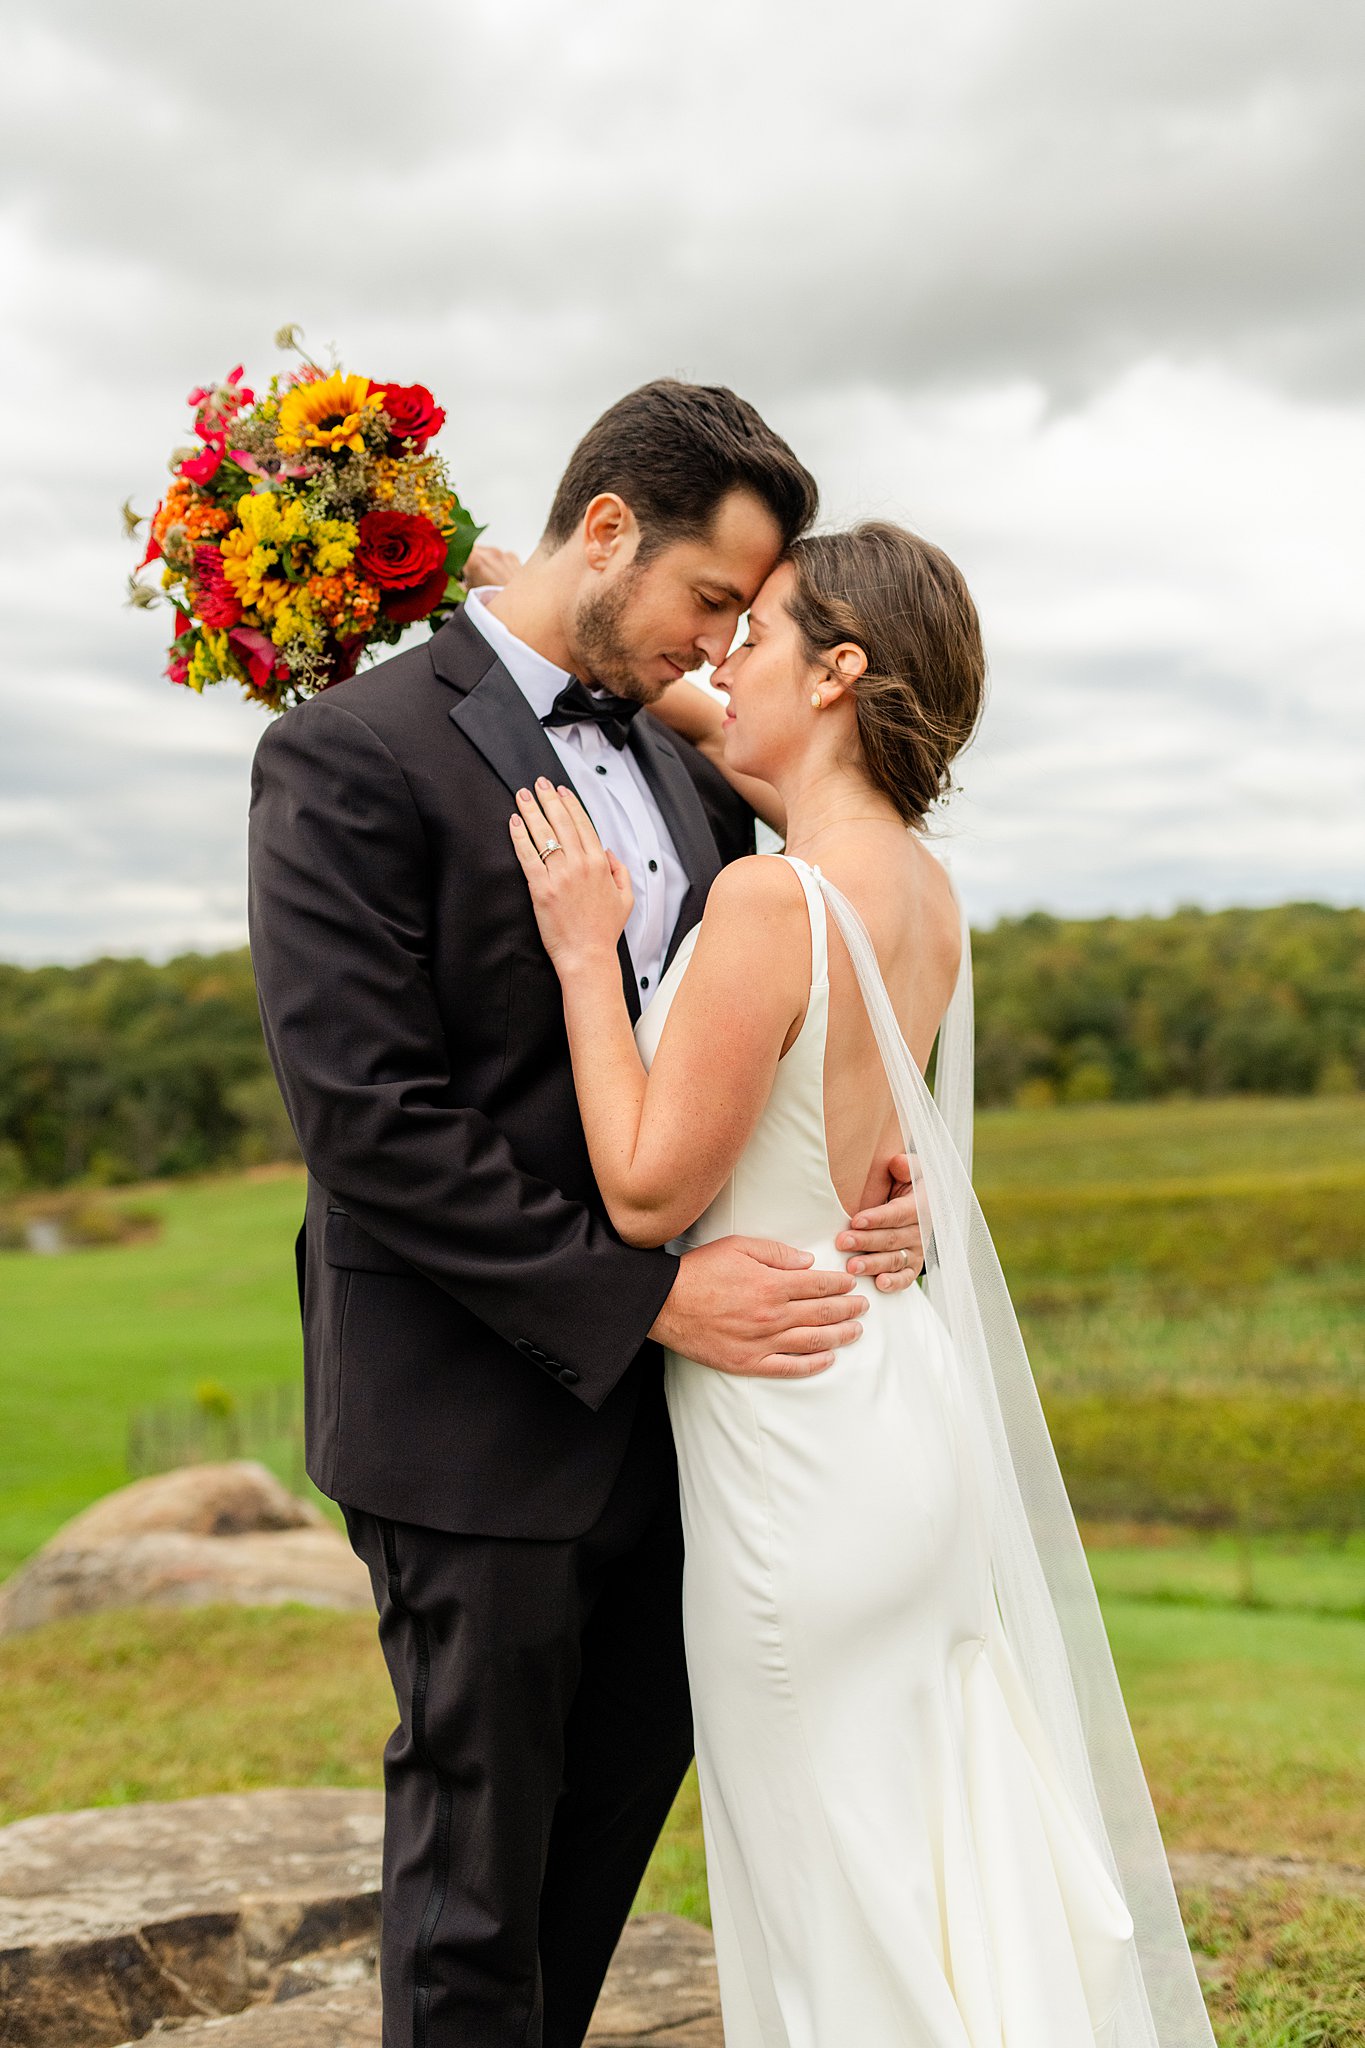 Newlyweds hug nose to nose on a rocky hill above a vineyard with a colorful bouquet wedding venues in northern virginia